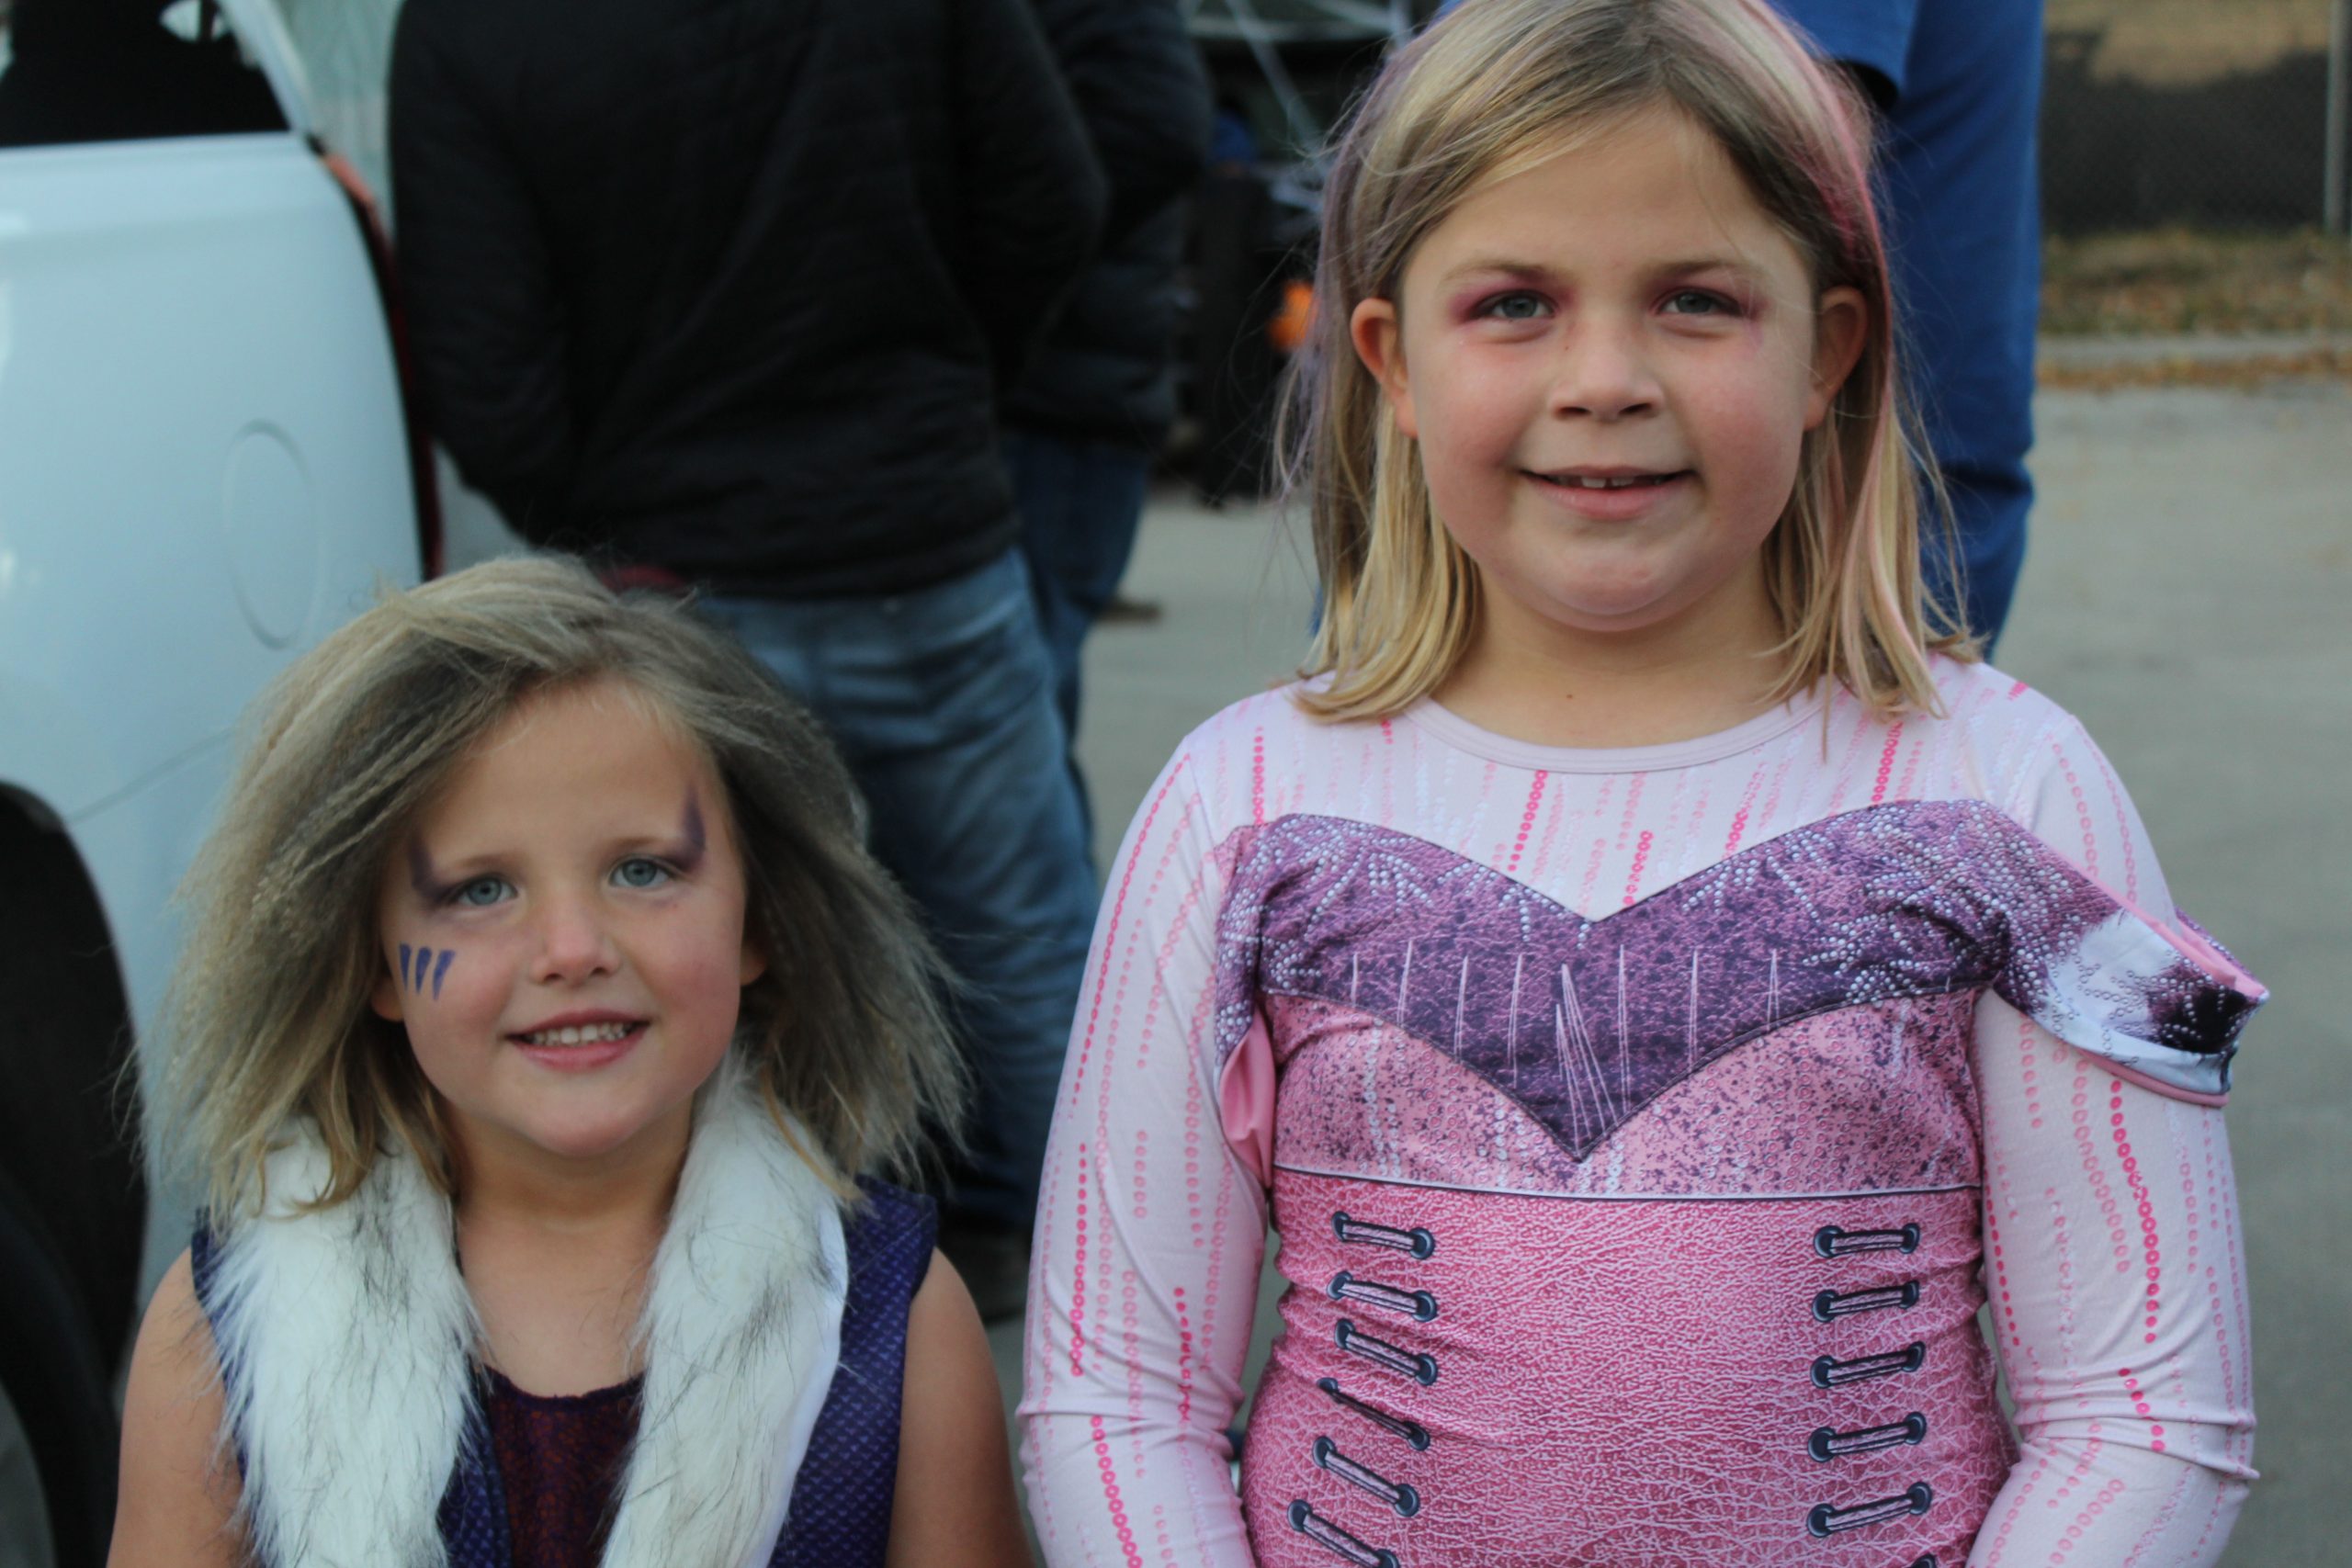 Students take a break from Trunk or Treat to pose for a photo in their costumes.